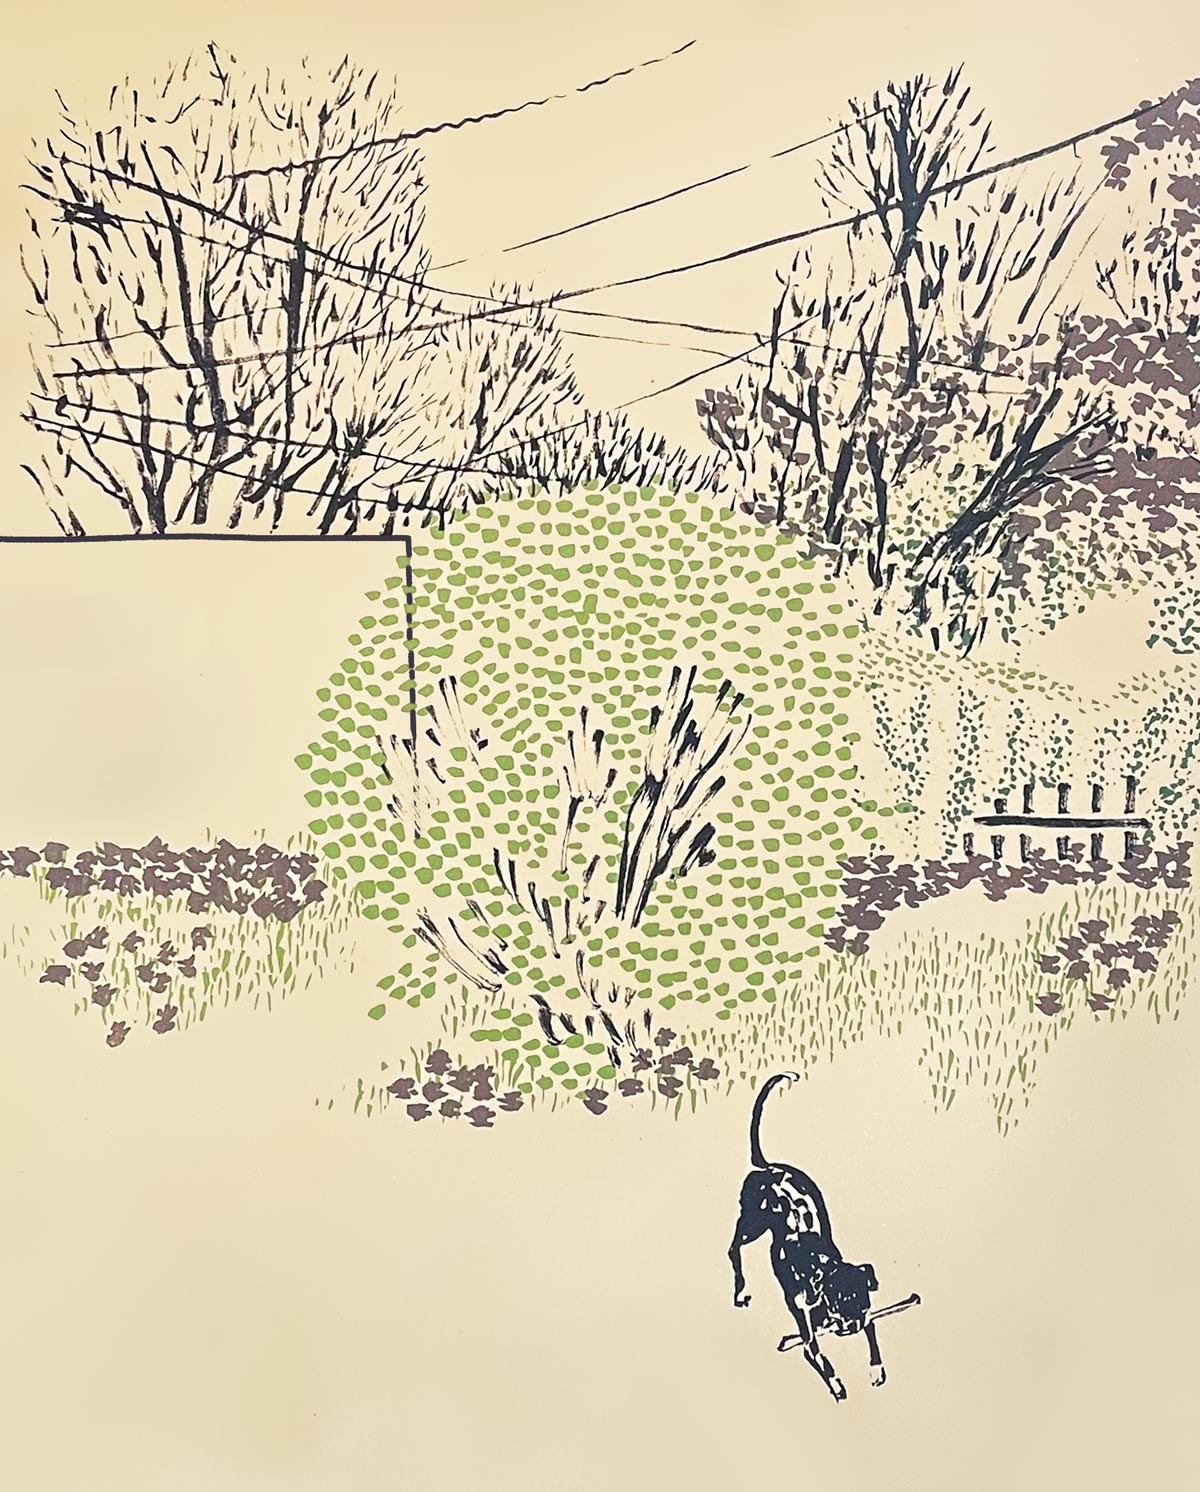 A lithograph of a dog chewing a stick in a backyard filled with trees and power lines